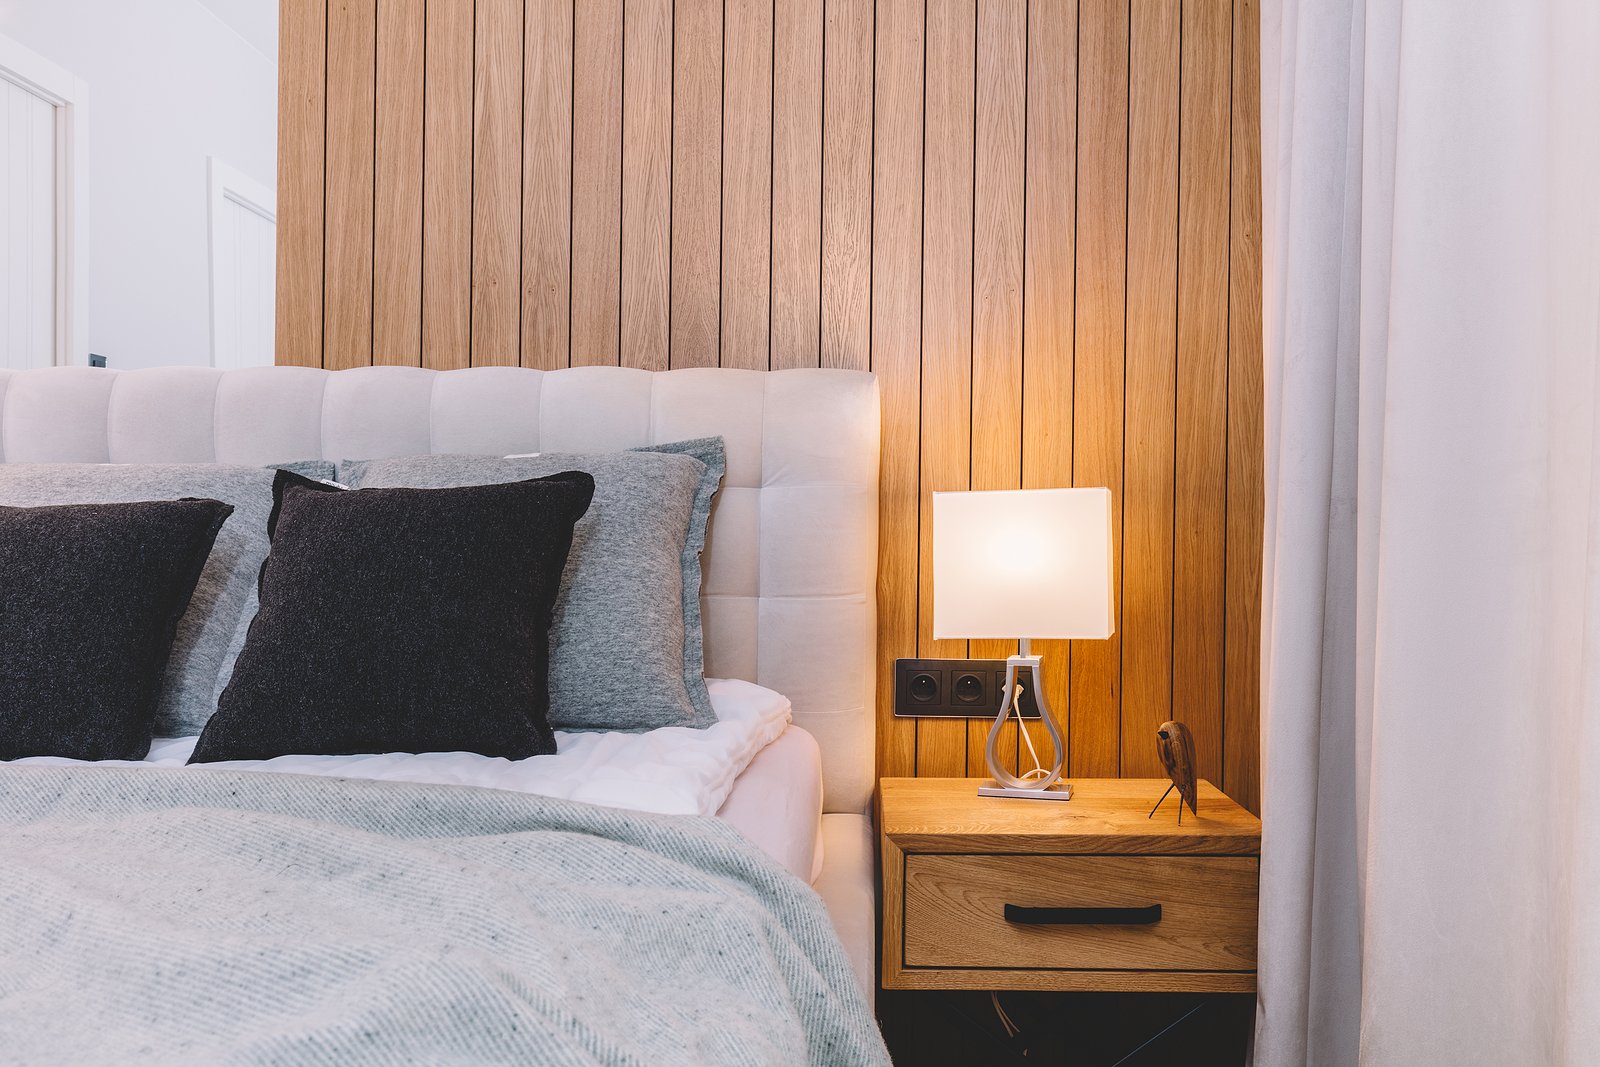 How to Make the Most of a Small Bedroom